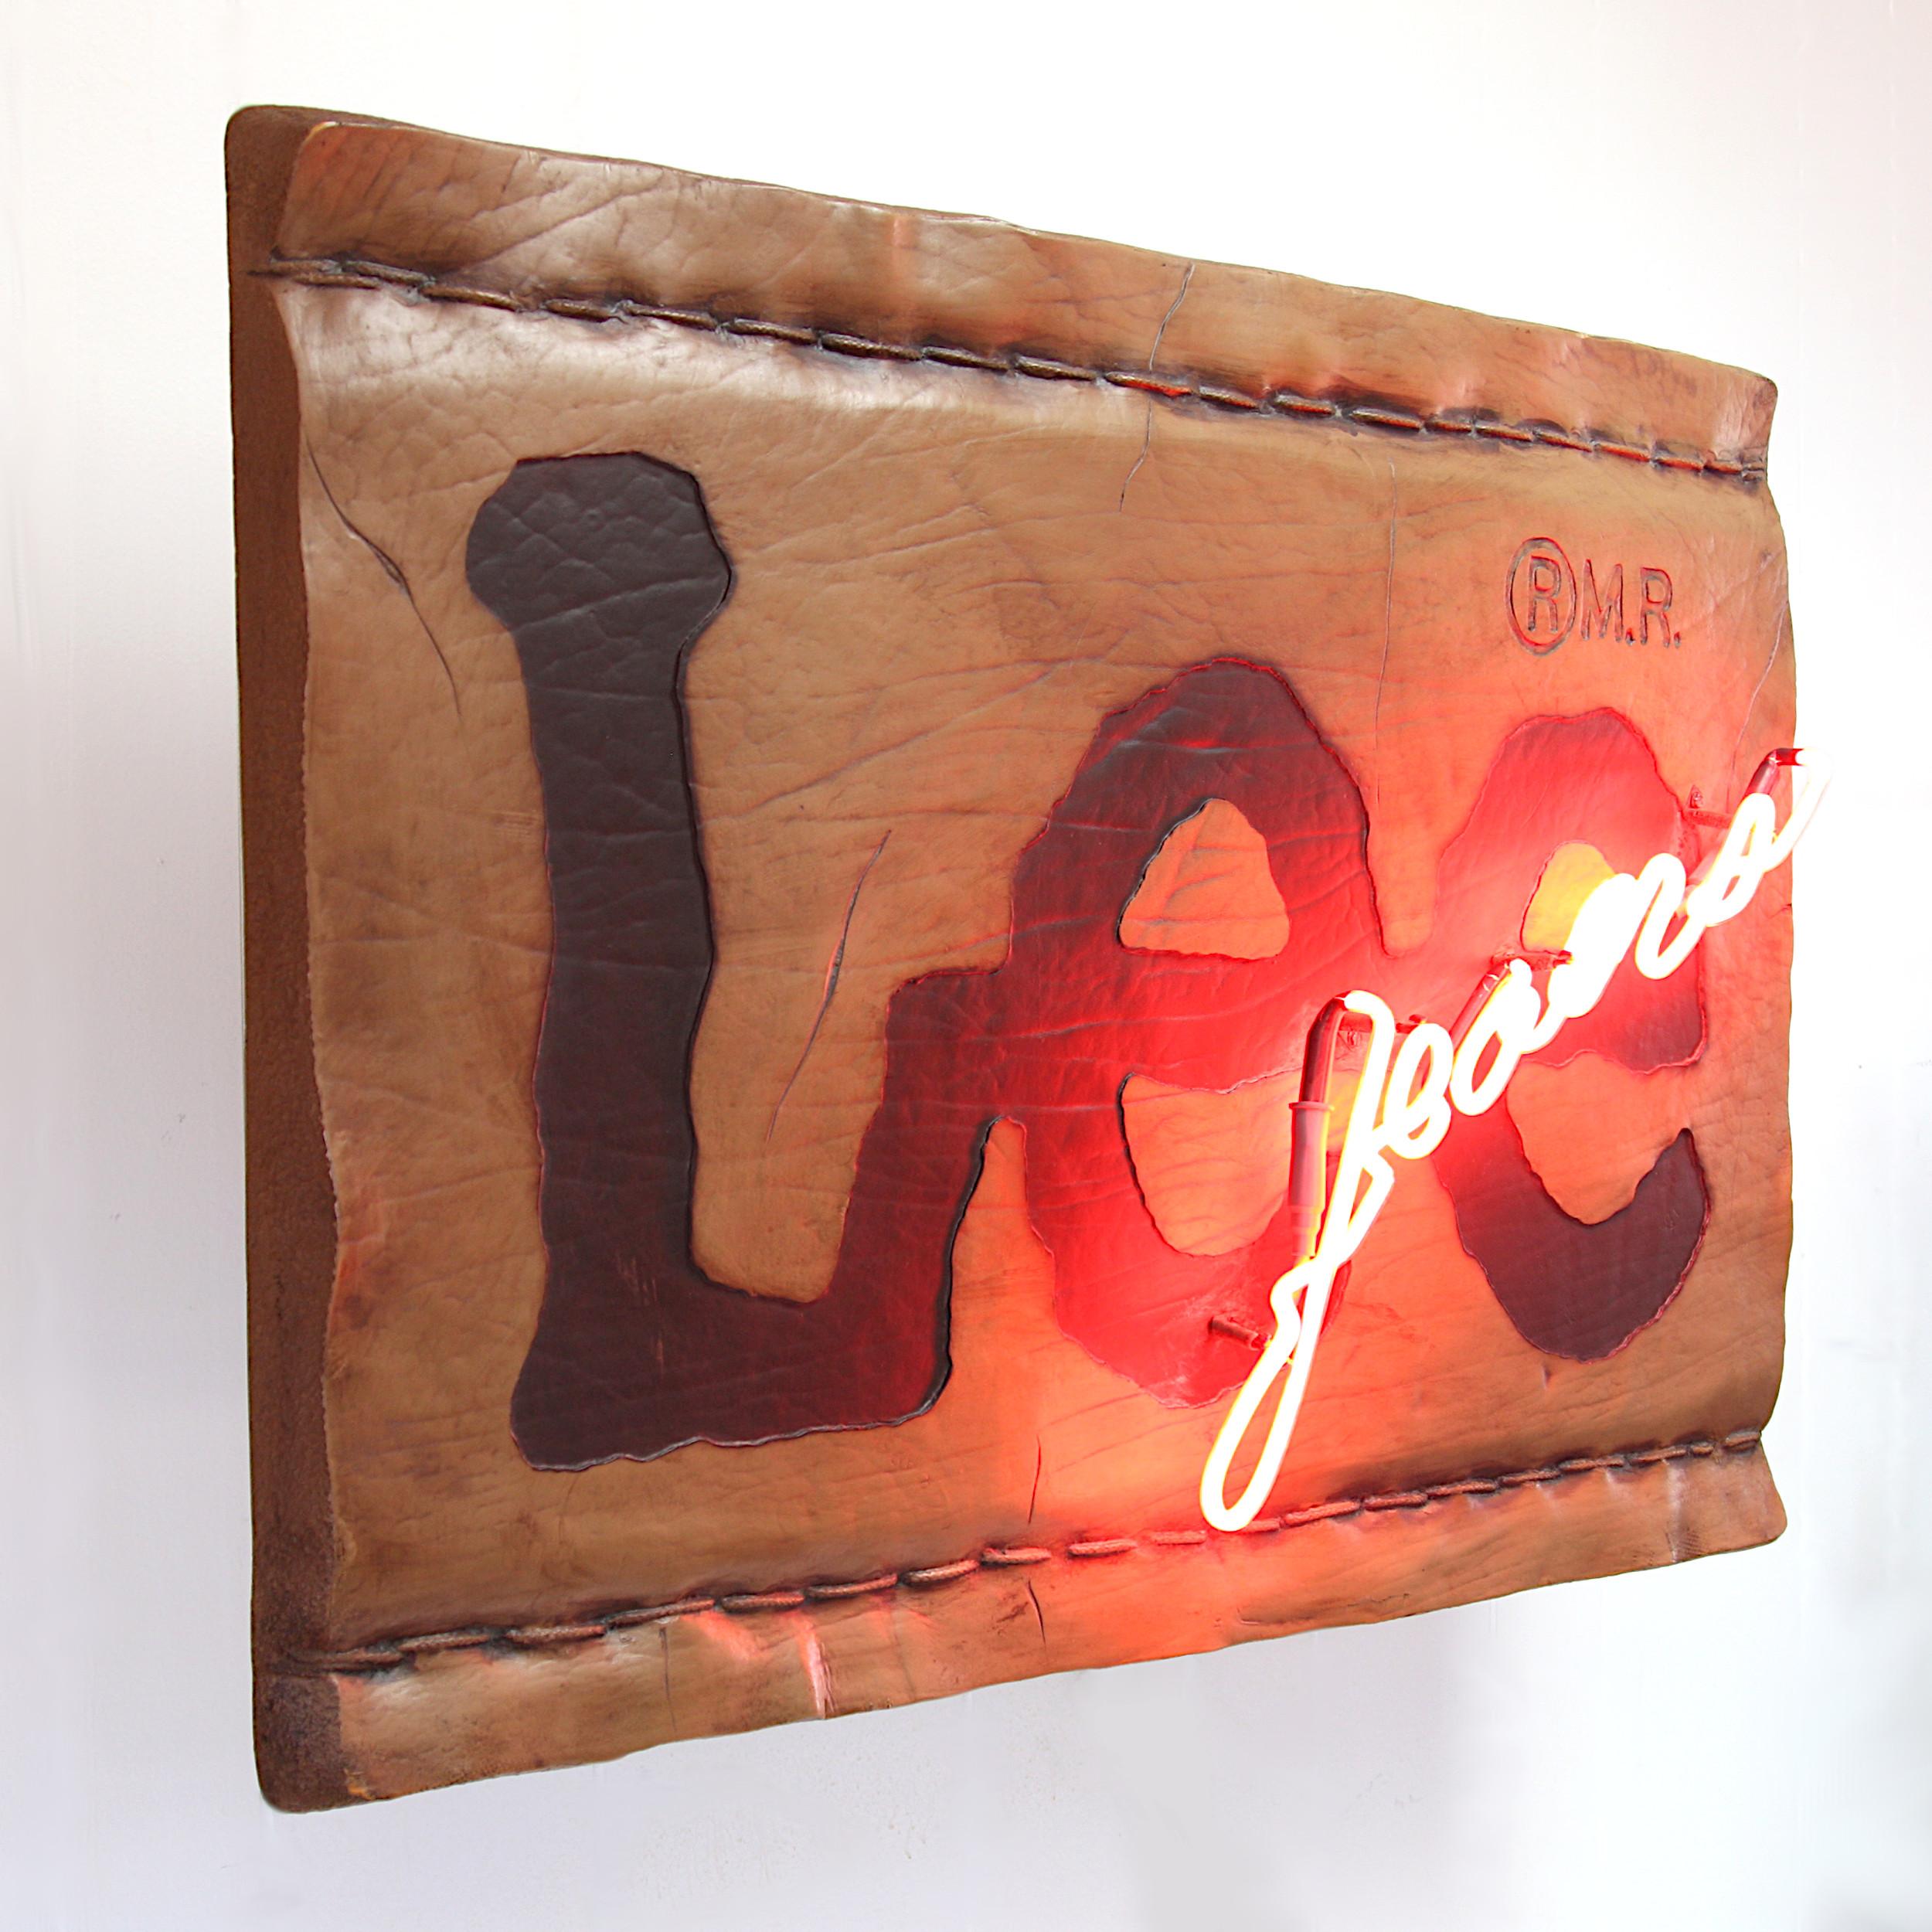 Wonderful vintage Lee Jeans neon sign only available to official Lee Jeans dealers. Sign features a molded-foam form in the shape of a leather Lee tag (over plywood core), red neon 